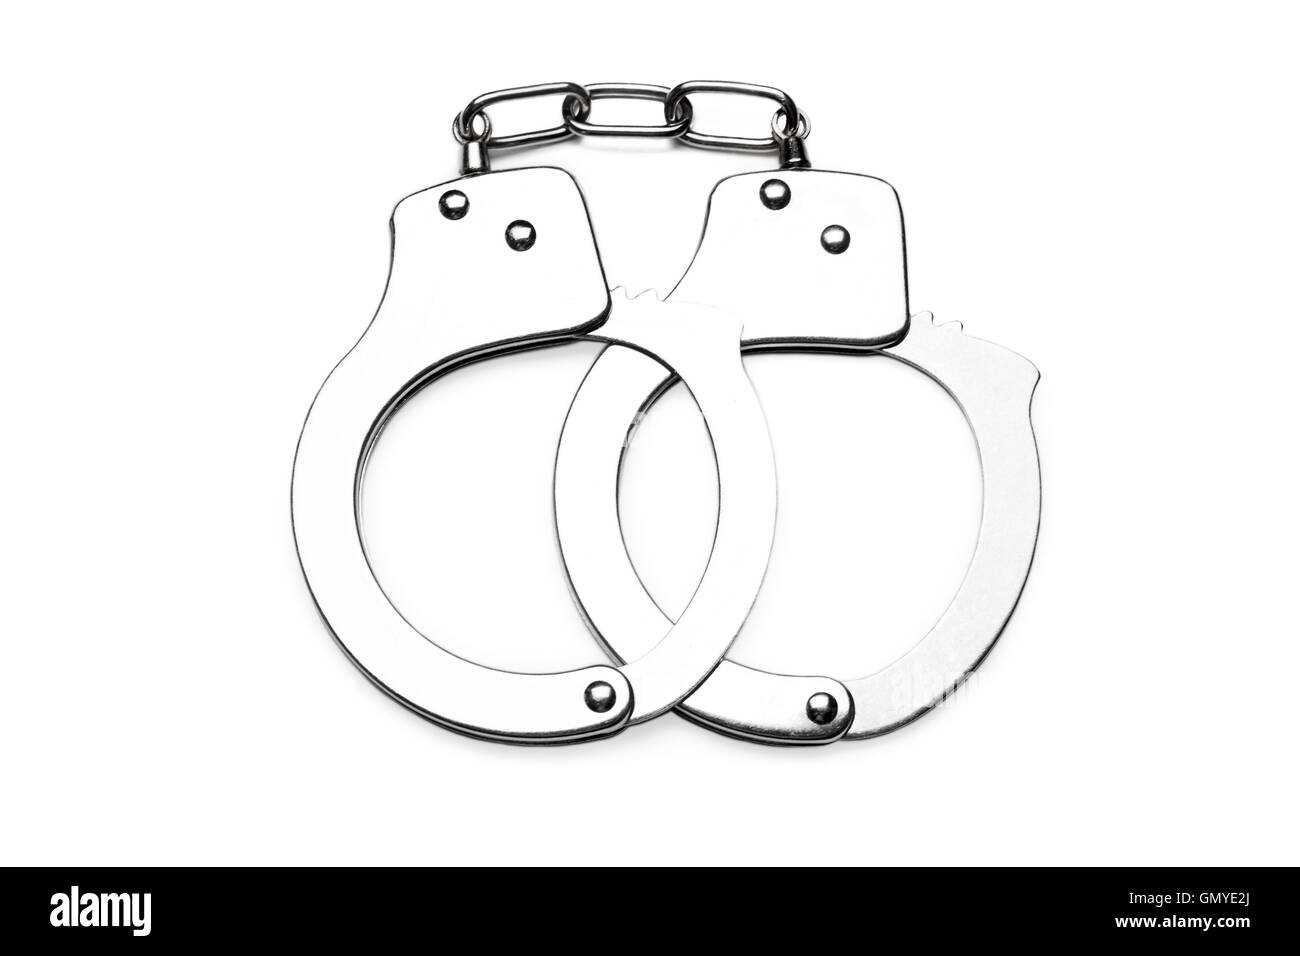 Handcuffs isolated Stock Photo